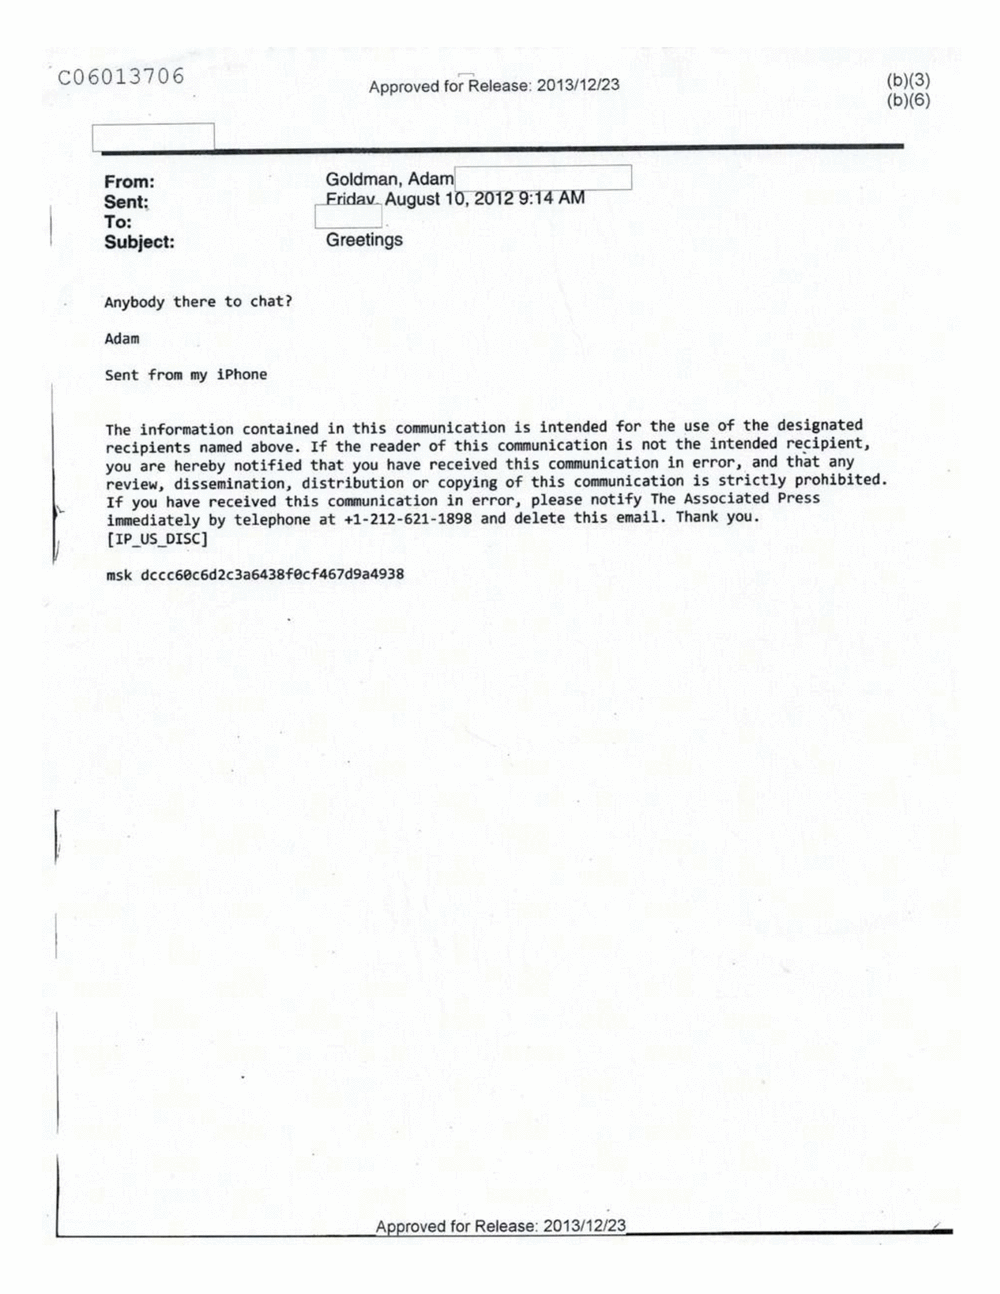 Page 566 from Email Correspondence Between Reporters and CIA Flacks